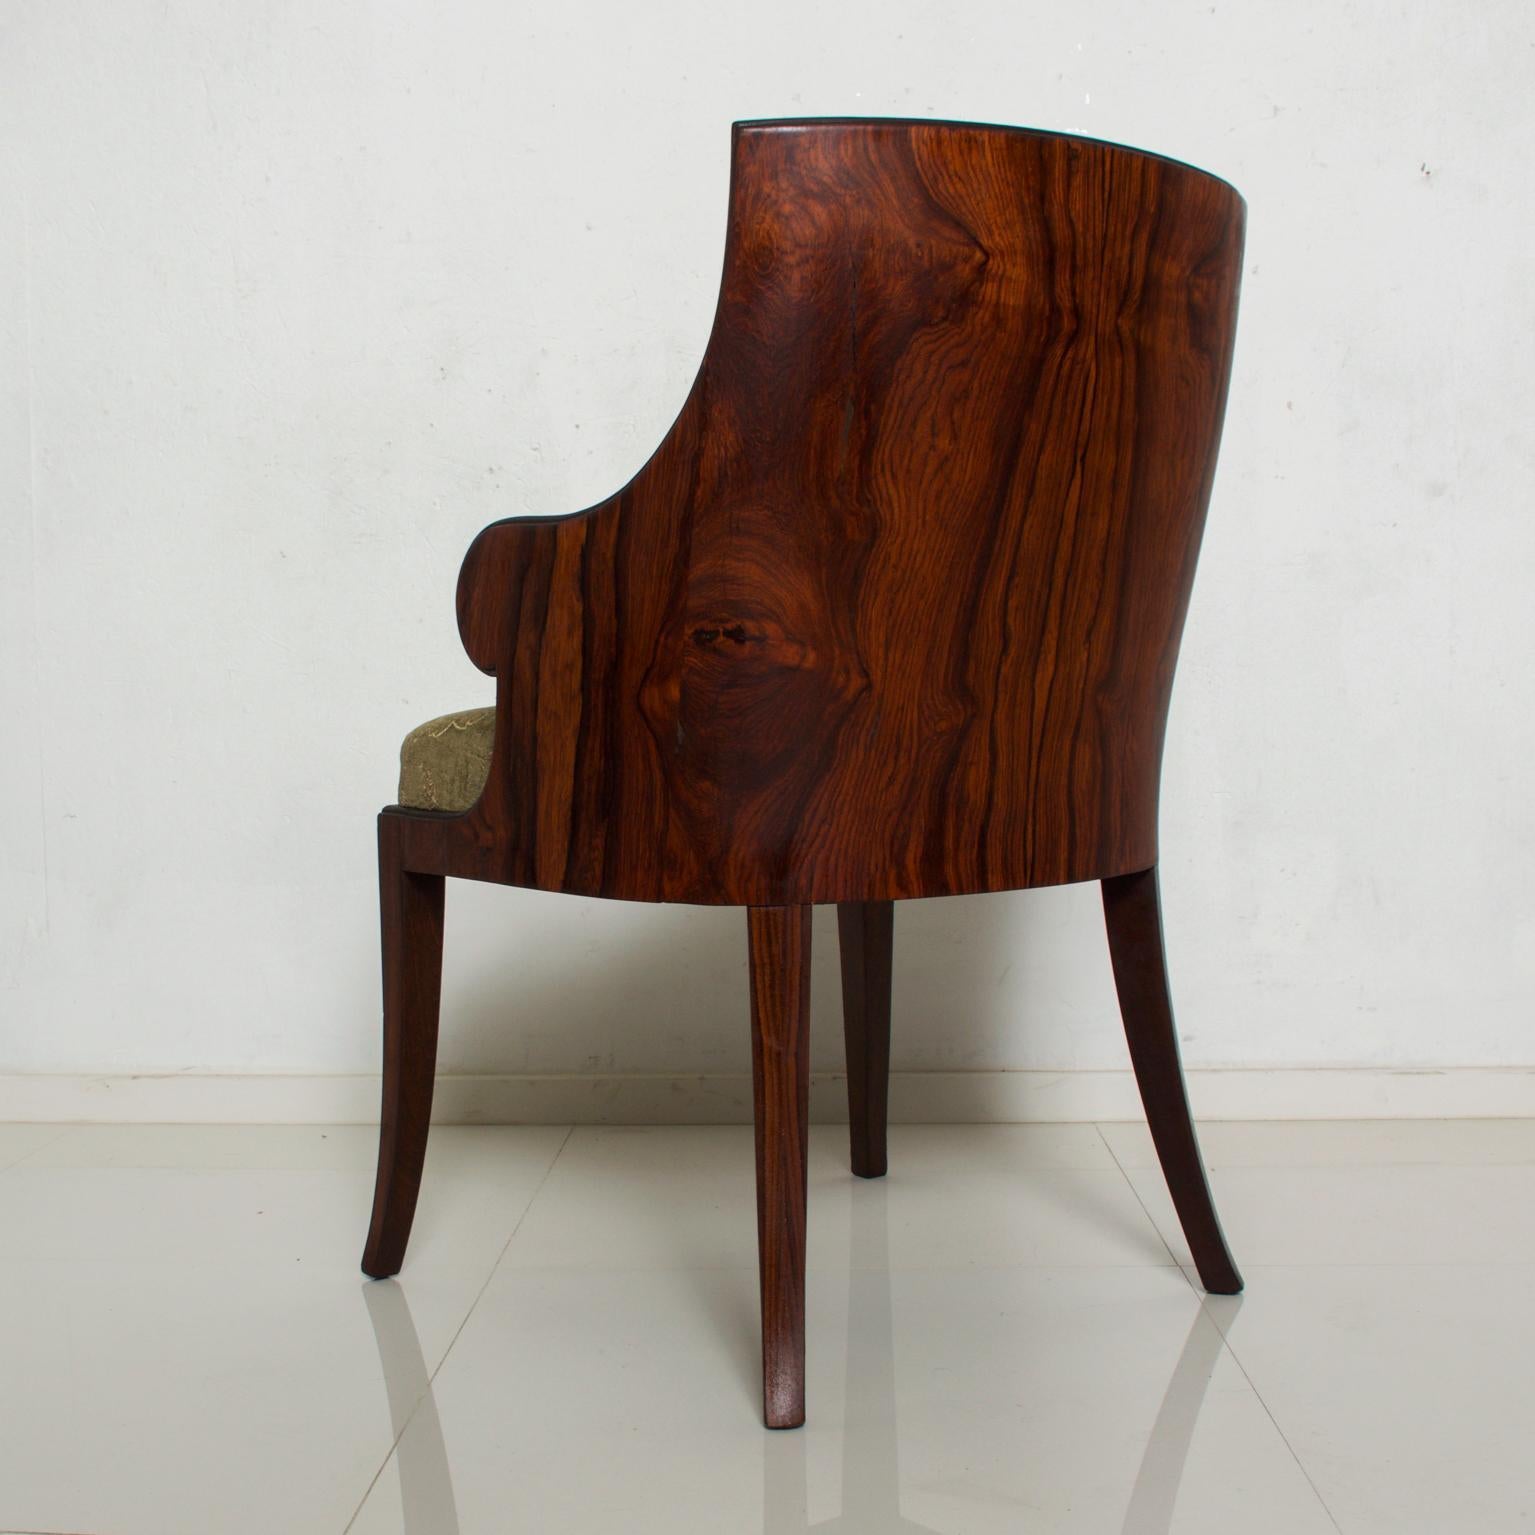 1940s French Art Deco Sculptural Pair of Rosewood Armchairs Style Gilbert Rohde 1